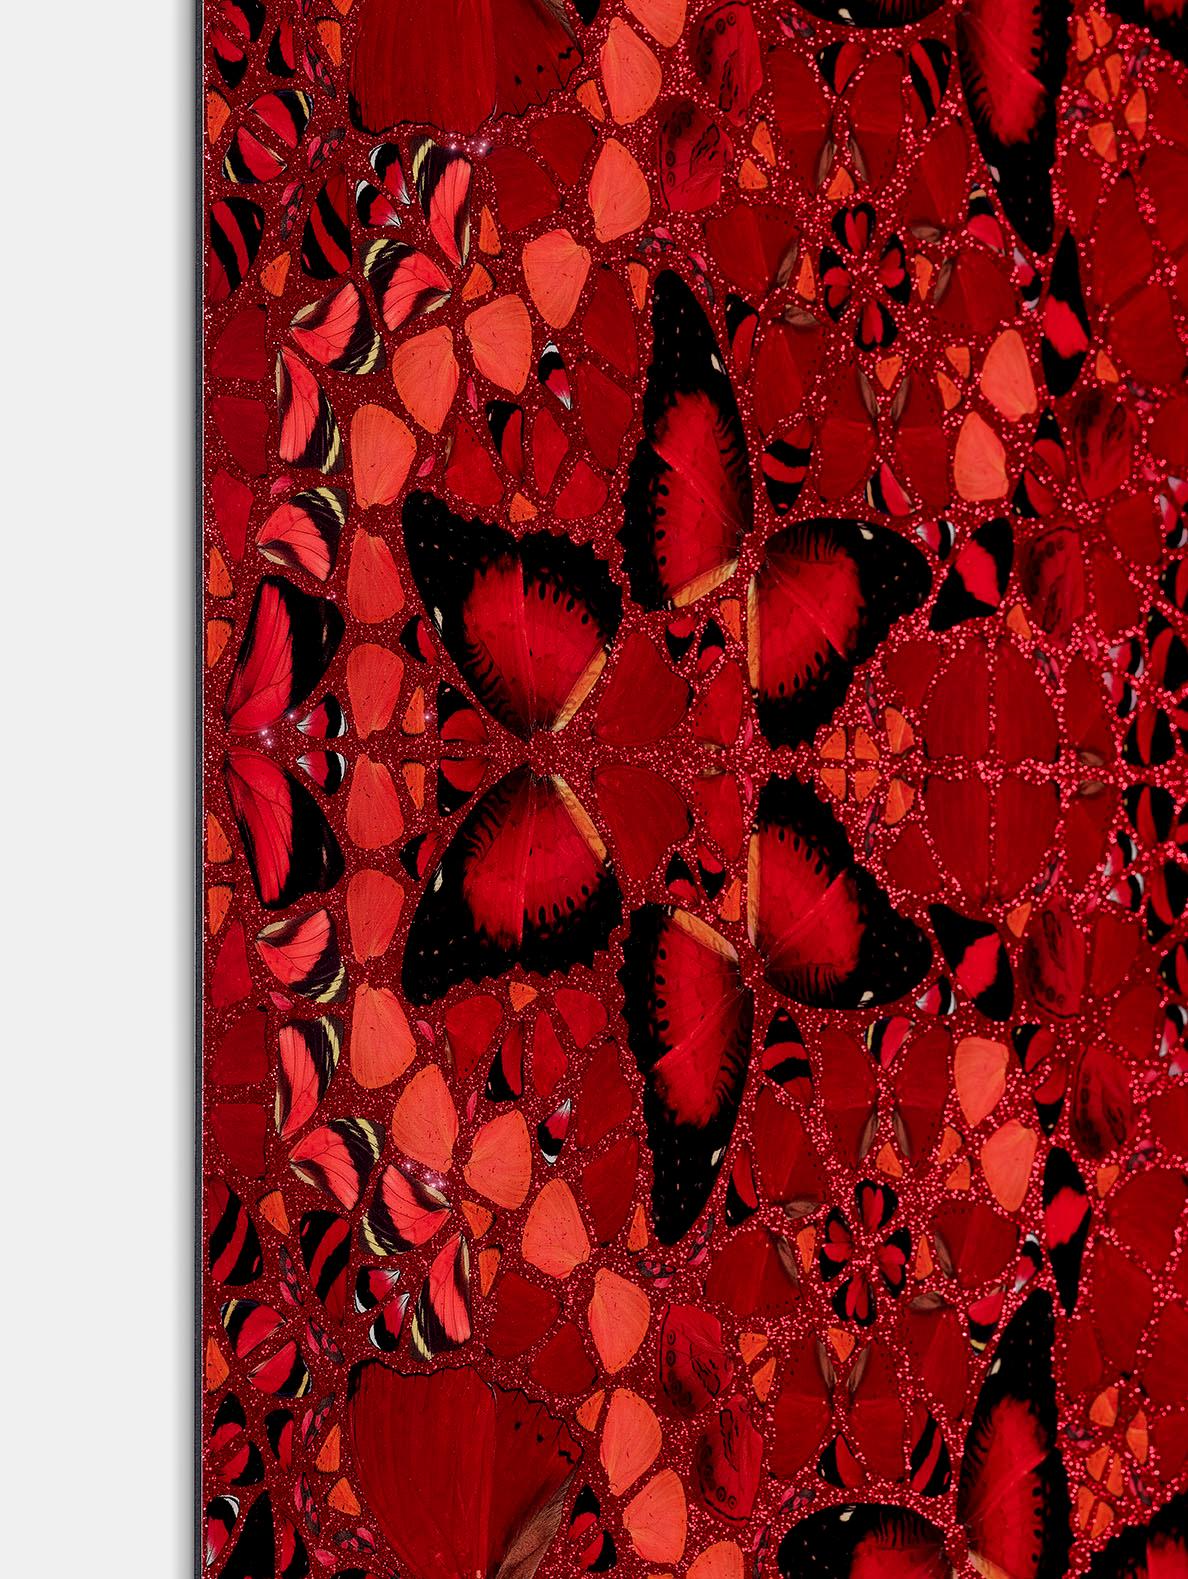 “The Empresses” is a series of five glorious artworks named after influential female rulers. They are composed of butterfly wings placed on a flaming red background which create a kaleidoscope effect.

Wu Zetian (The Empresses, H10-01), 2022
Edition